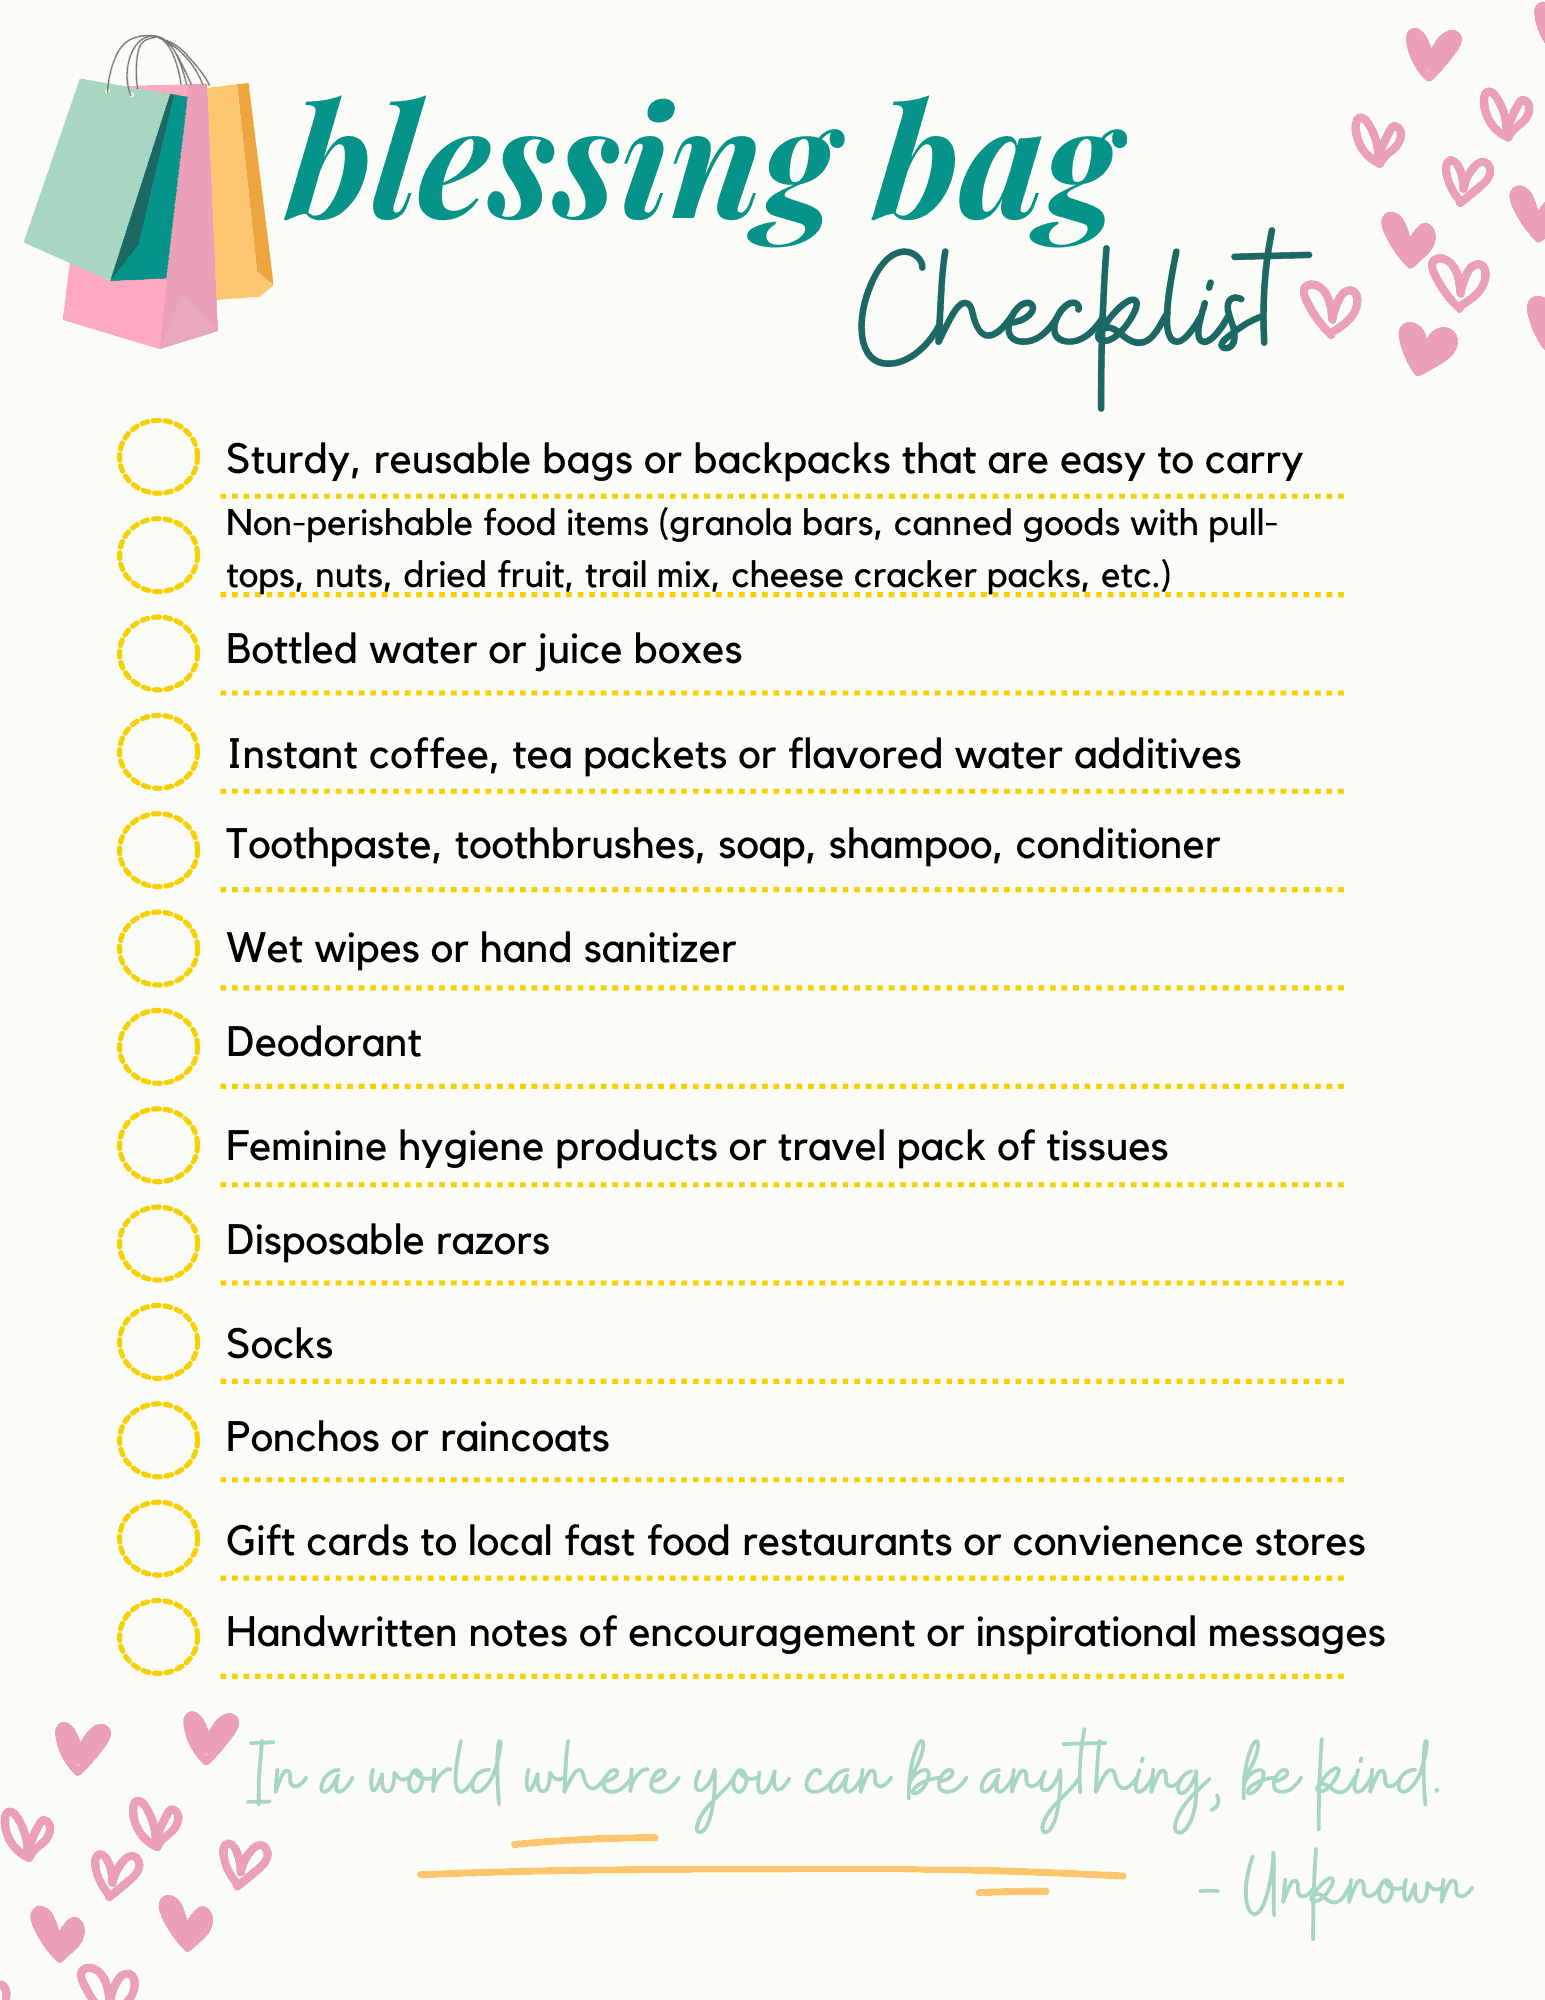 Colorful  checklist for making blessing bags.